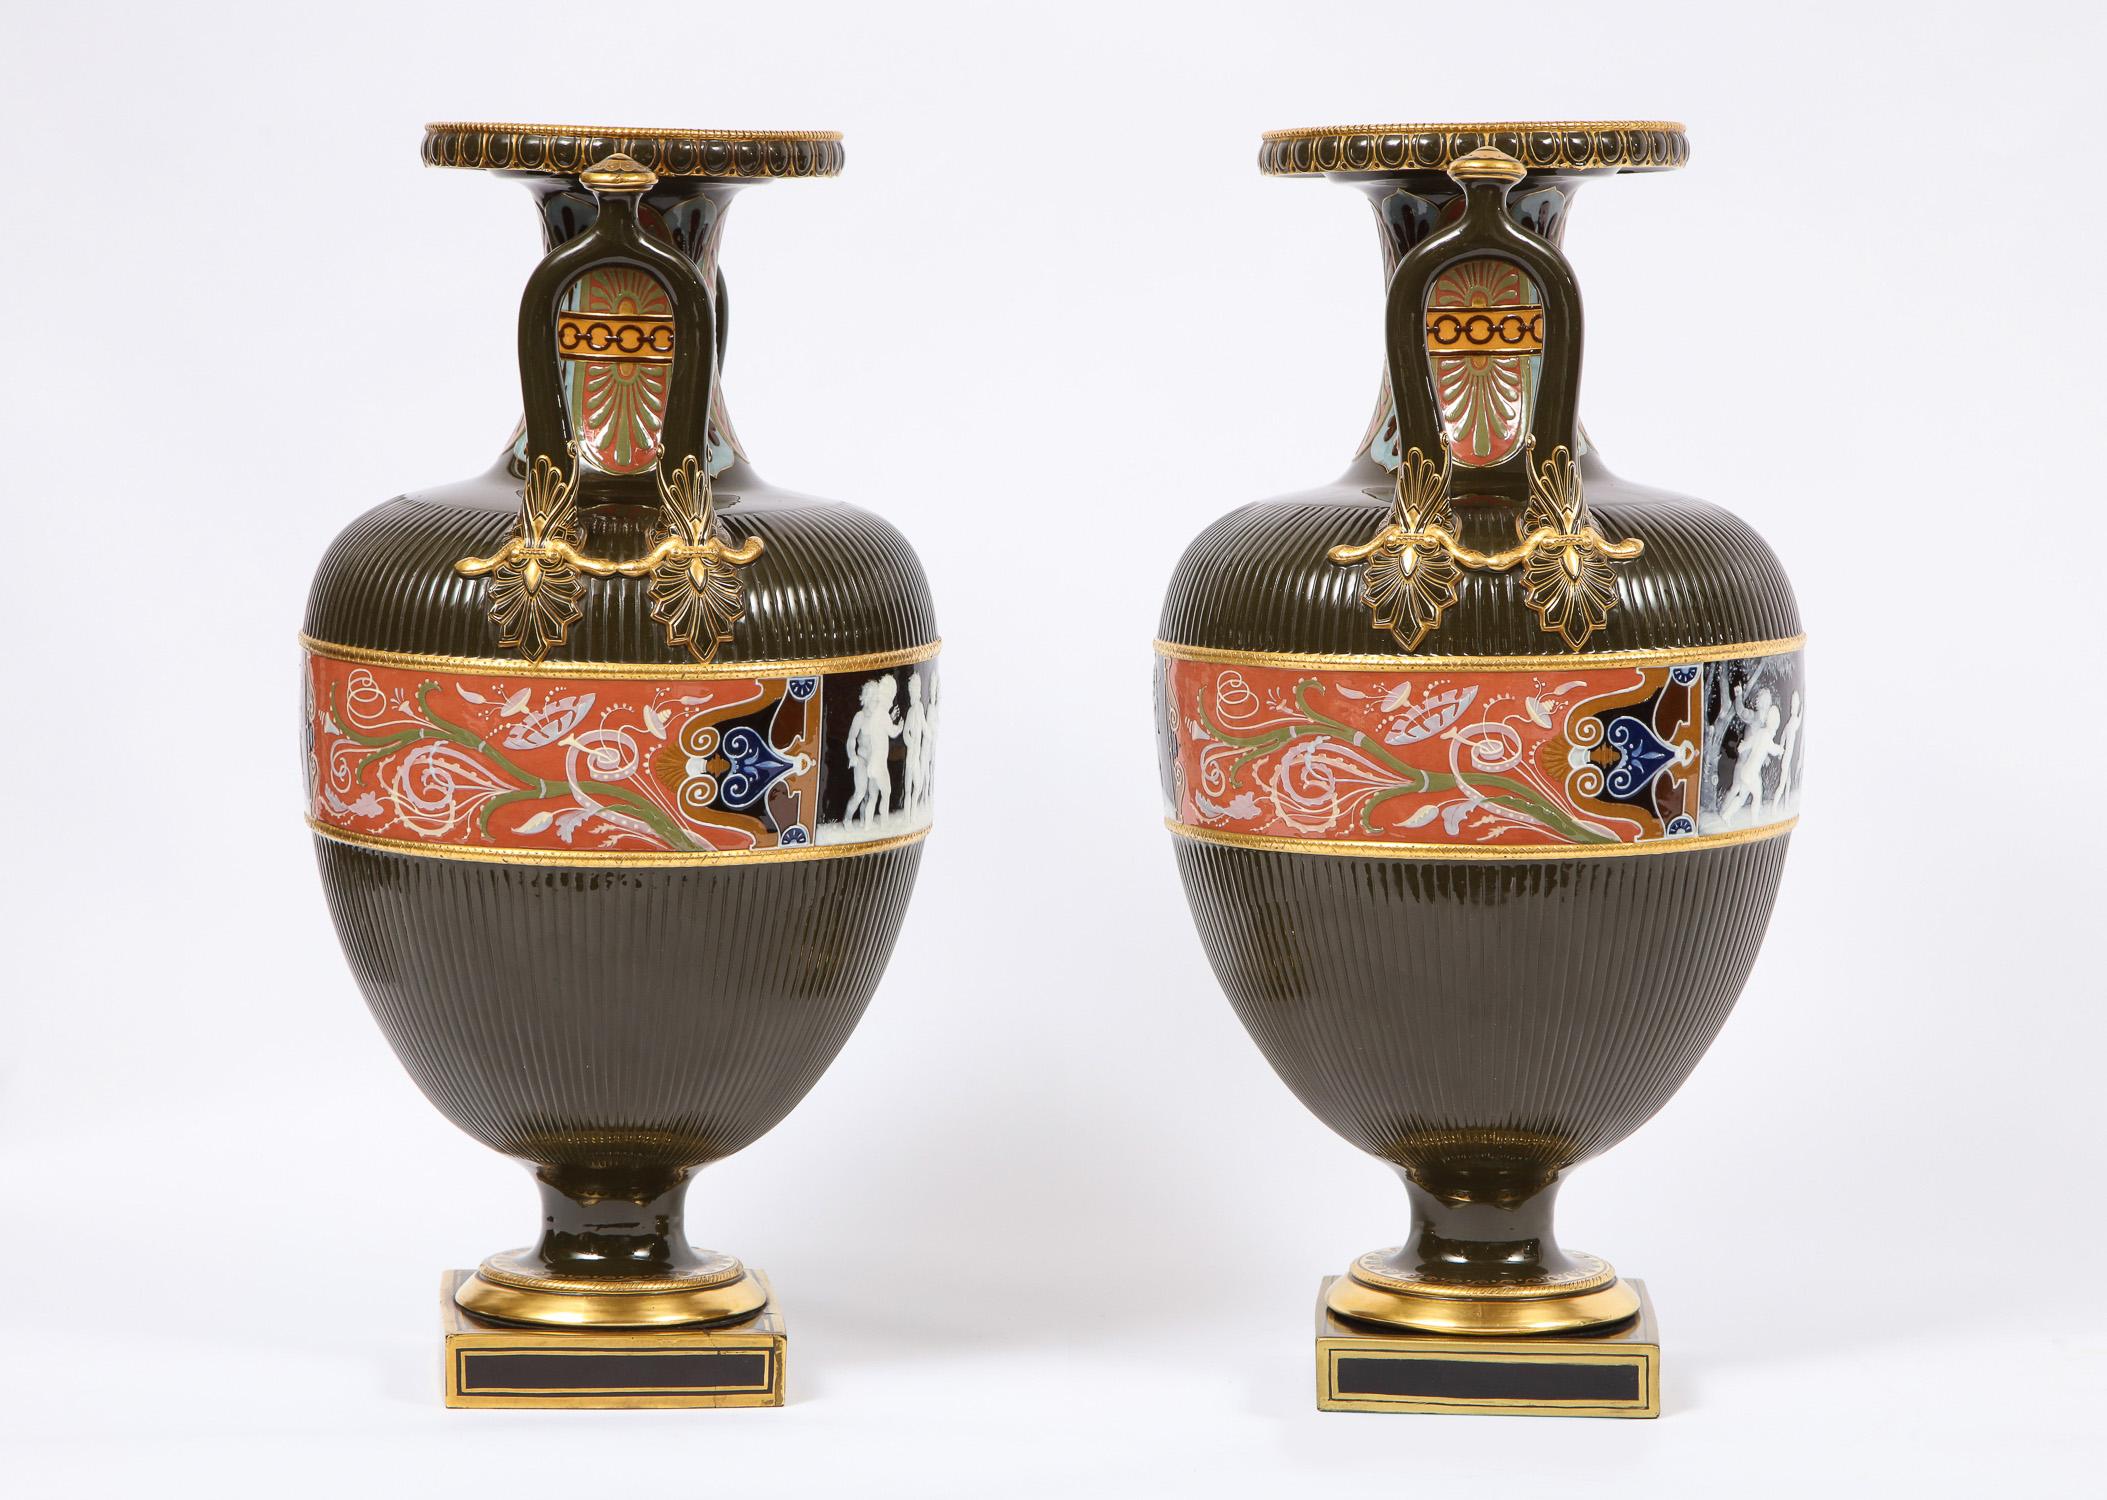 English Pair of Mintons Pate Sur Pate Vases with Multi-Panel Neoclassical Subjects